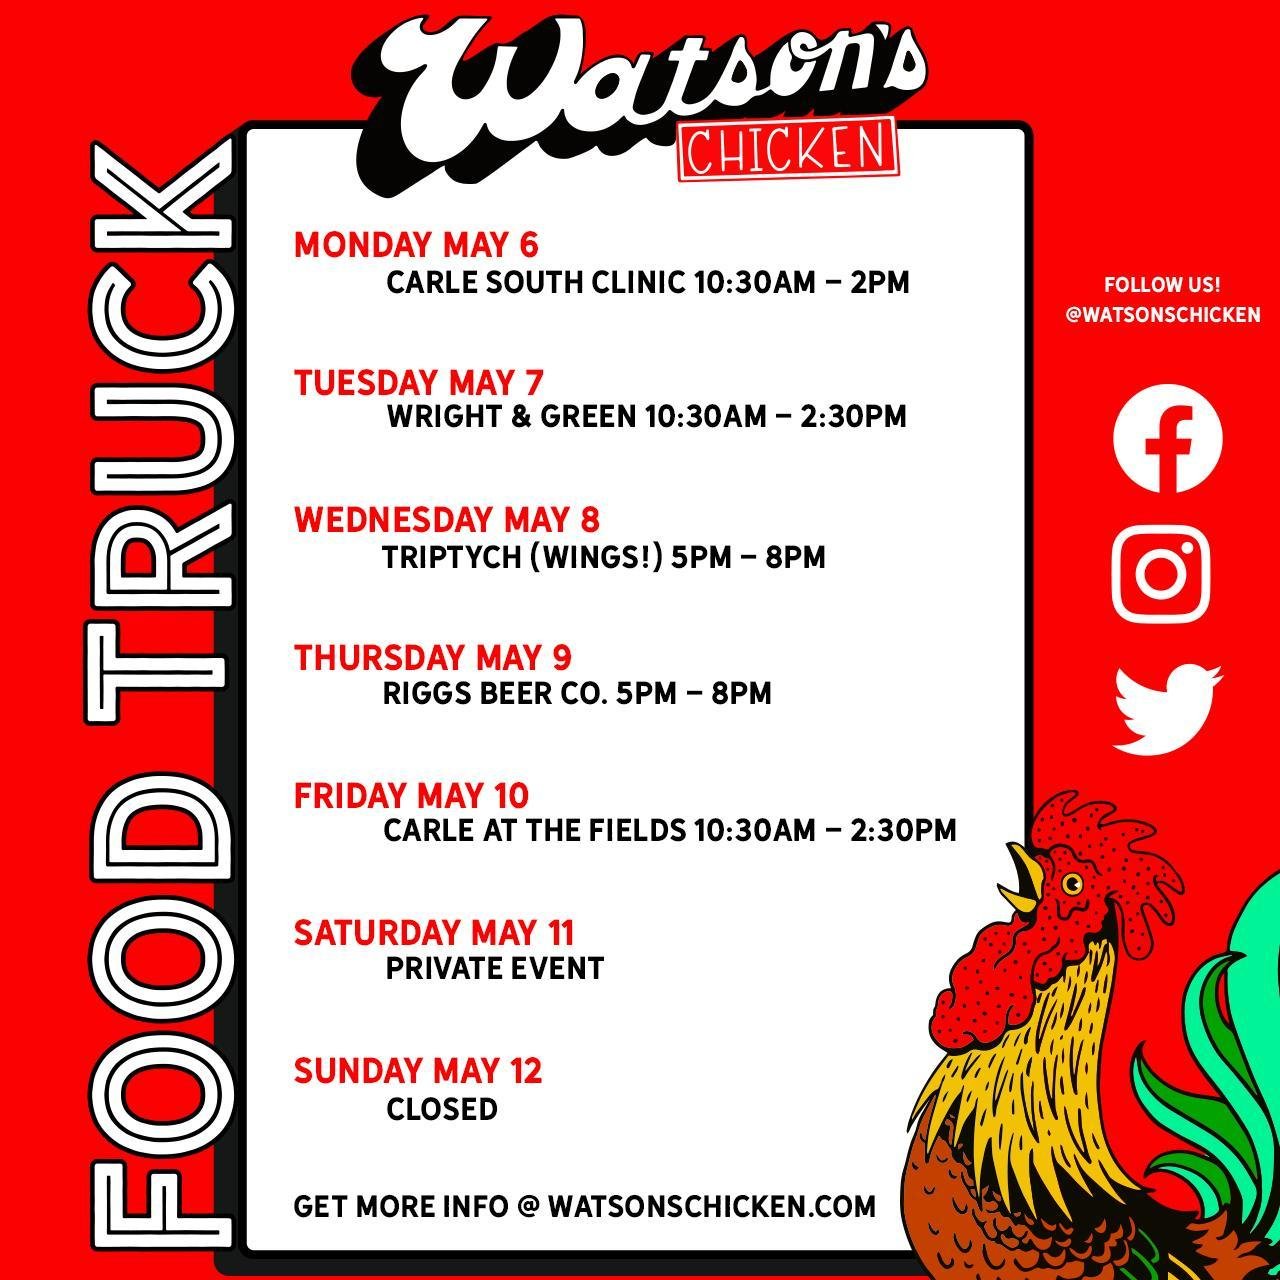 Food Truck schedule for 5/6 - 5/12. To view the full schedule or to book the food truck for your private event, please visit the link in our bio!